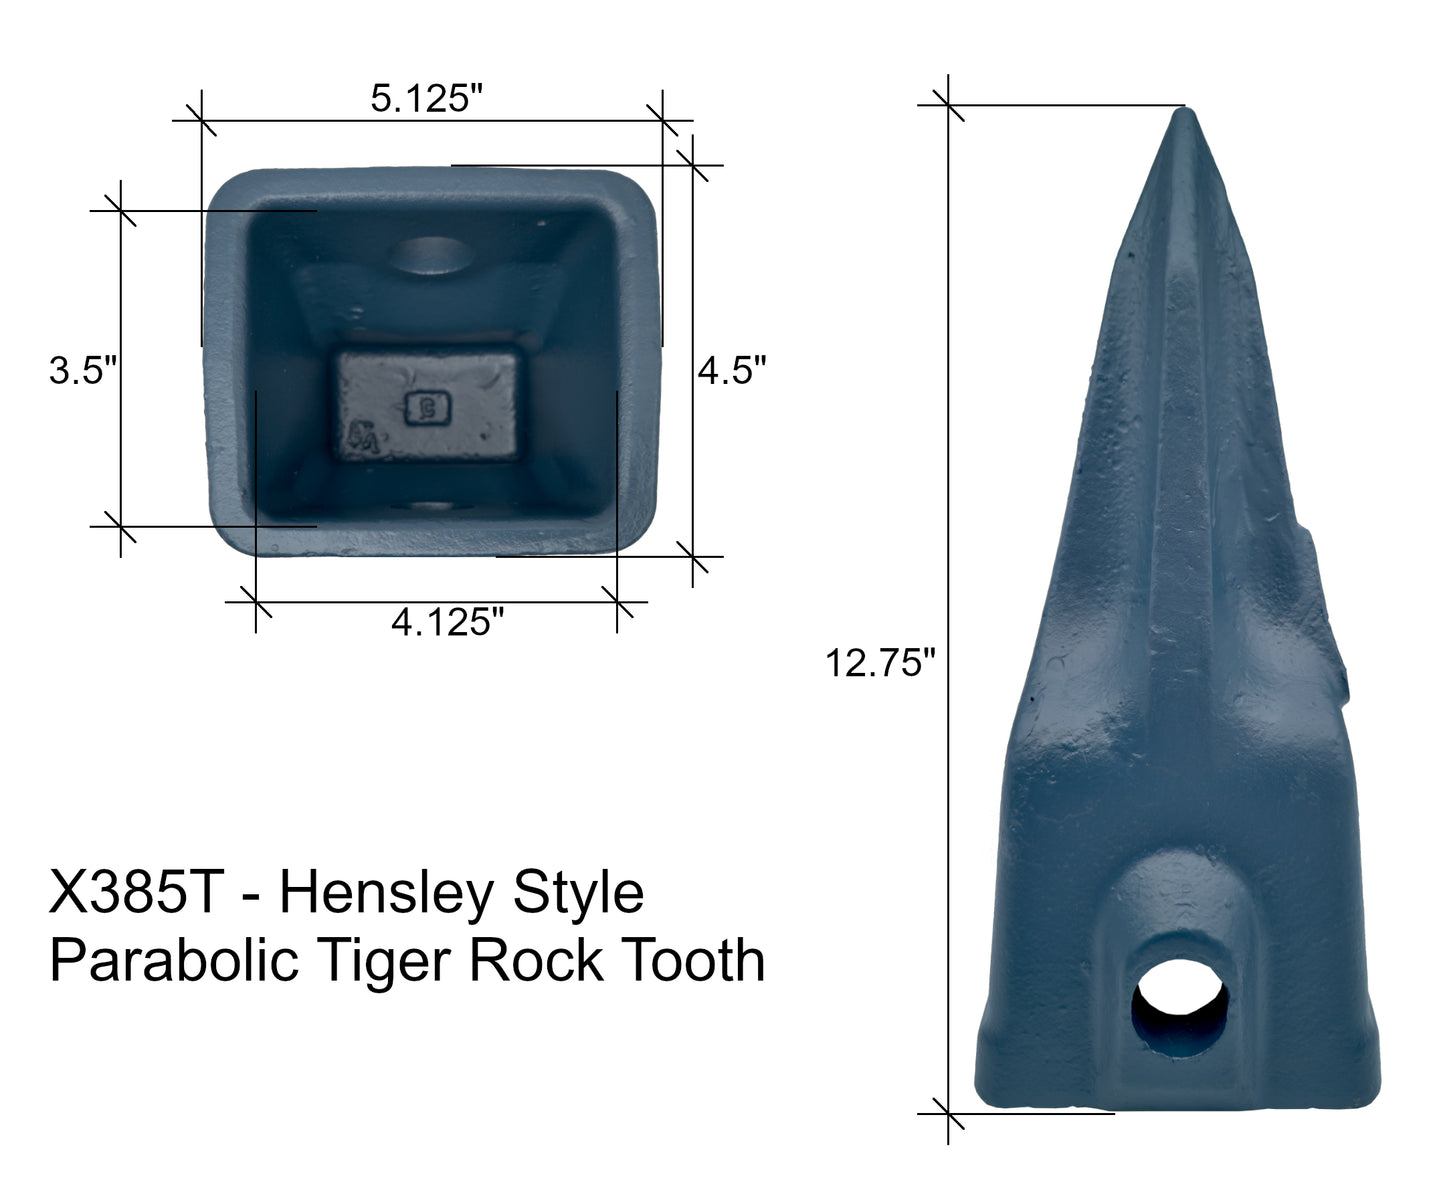 X385T Single Tiger Rock Tooth - 'Hensley X385 Style' for Excavator Buckets